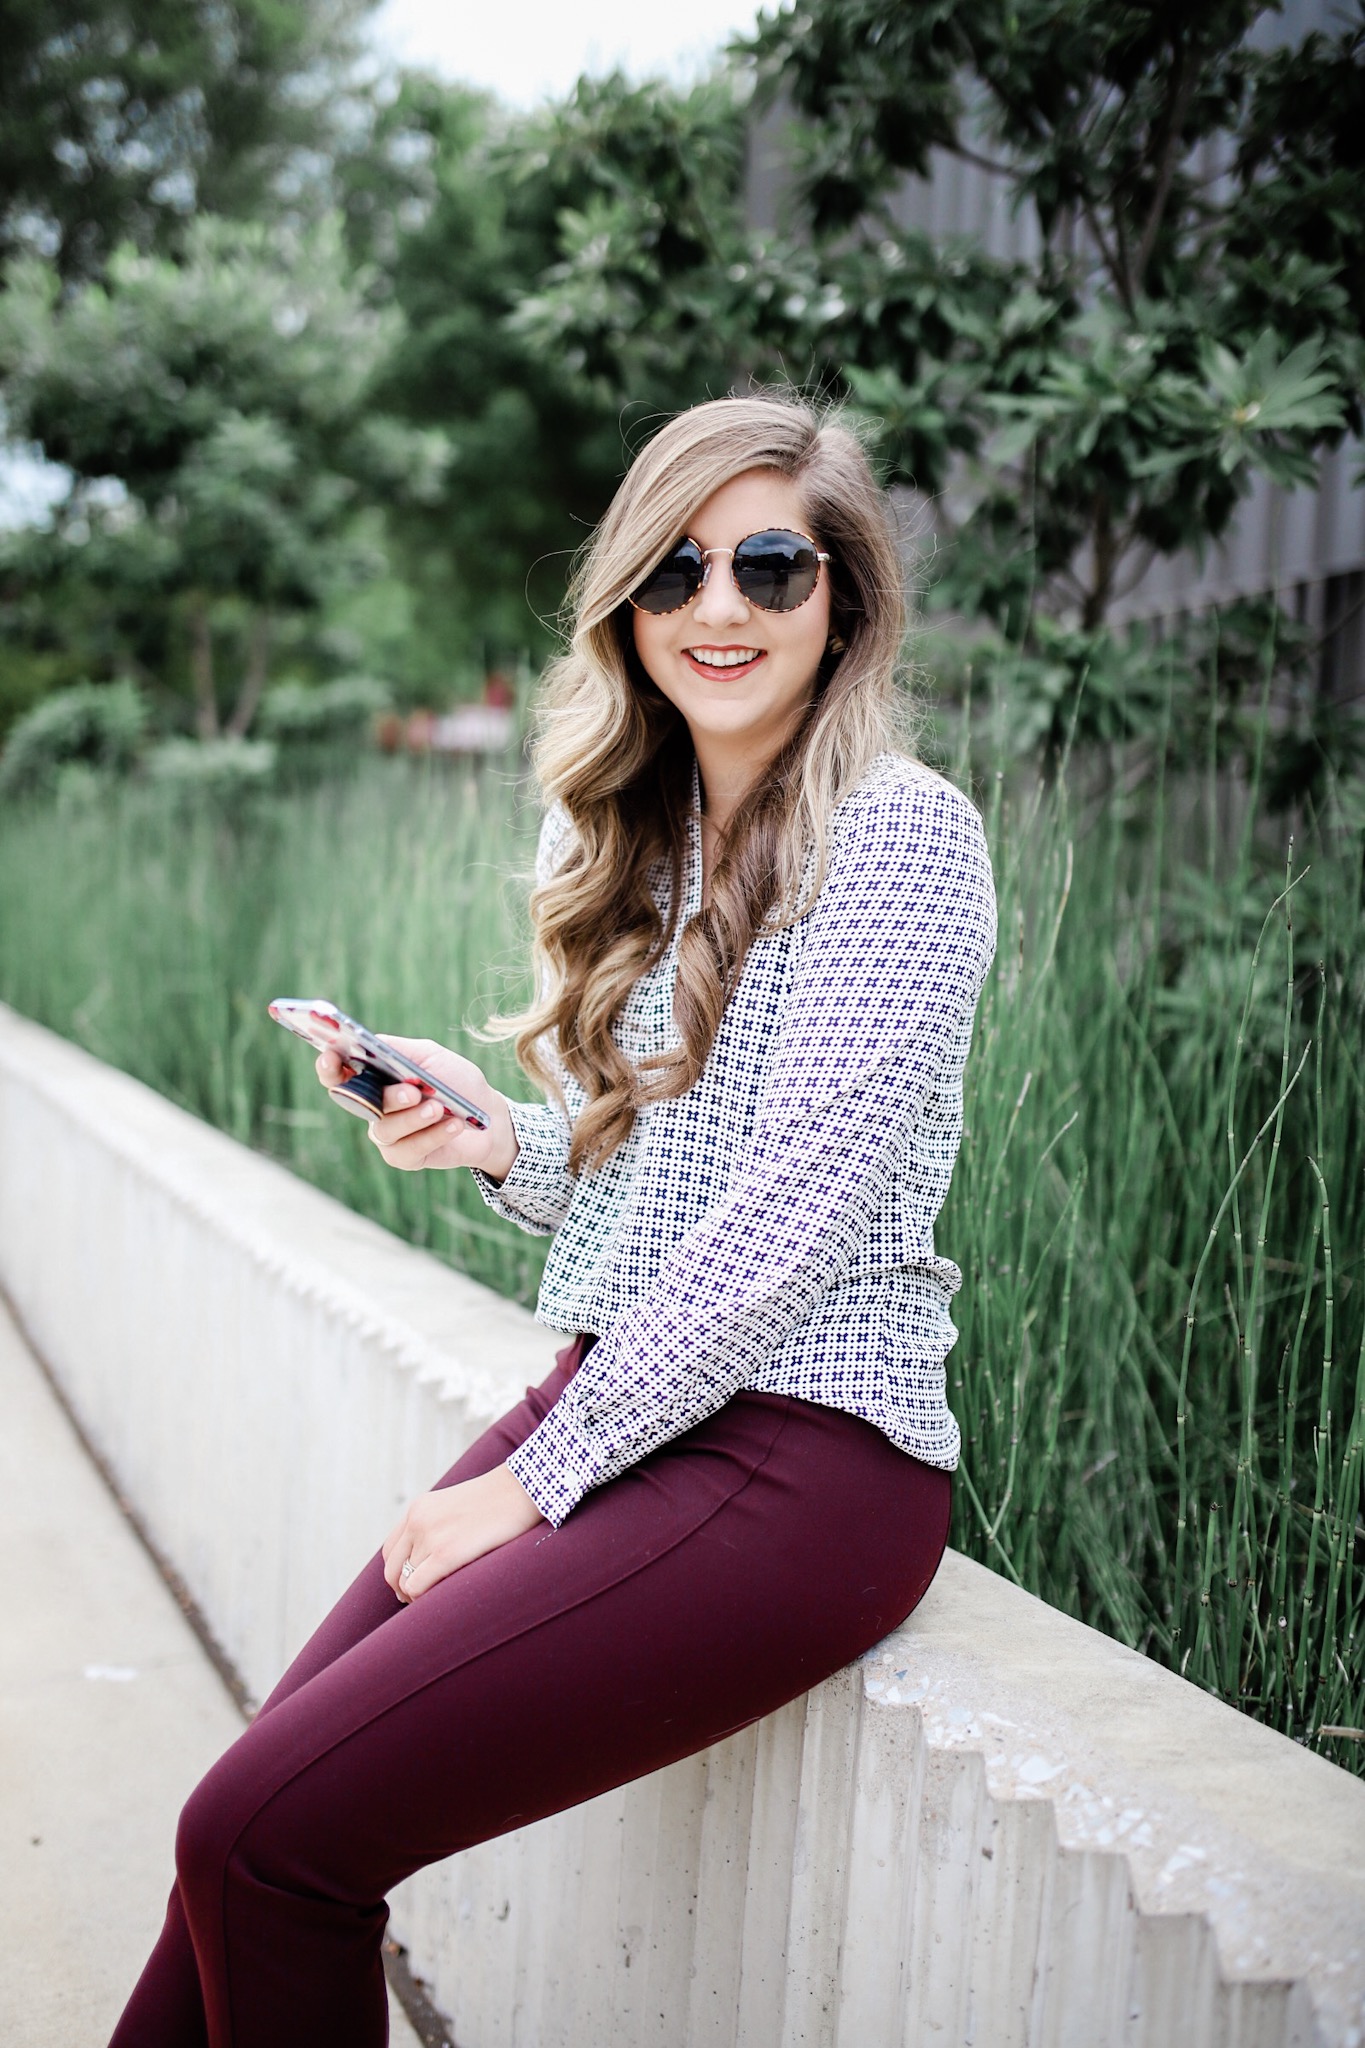 Fall Workwear Outfit Inspiration With Maroon Pants - Thrifty Pineapple